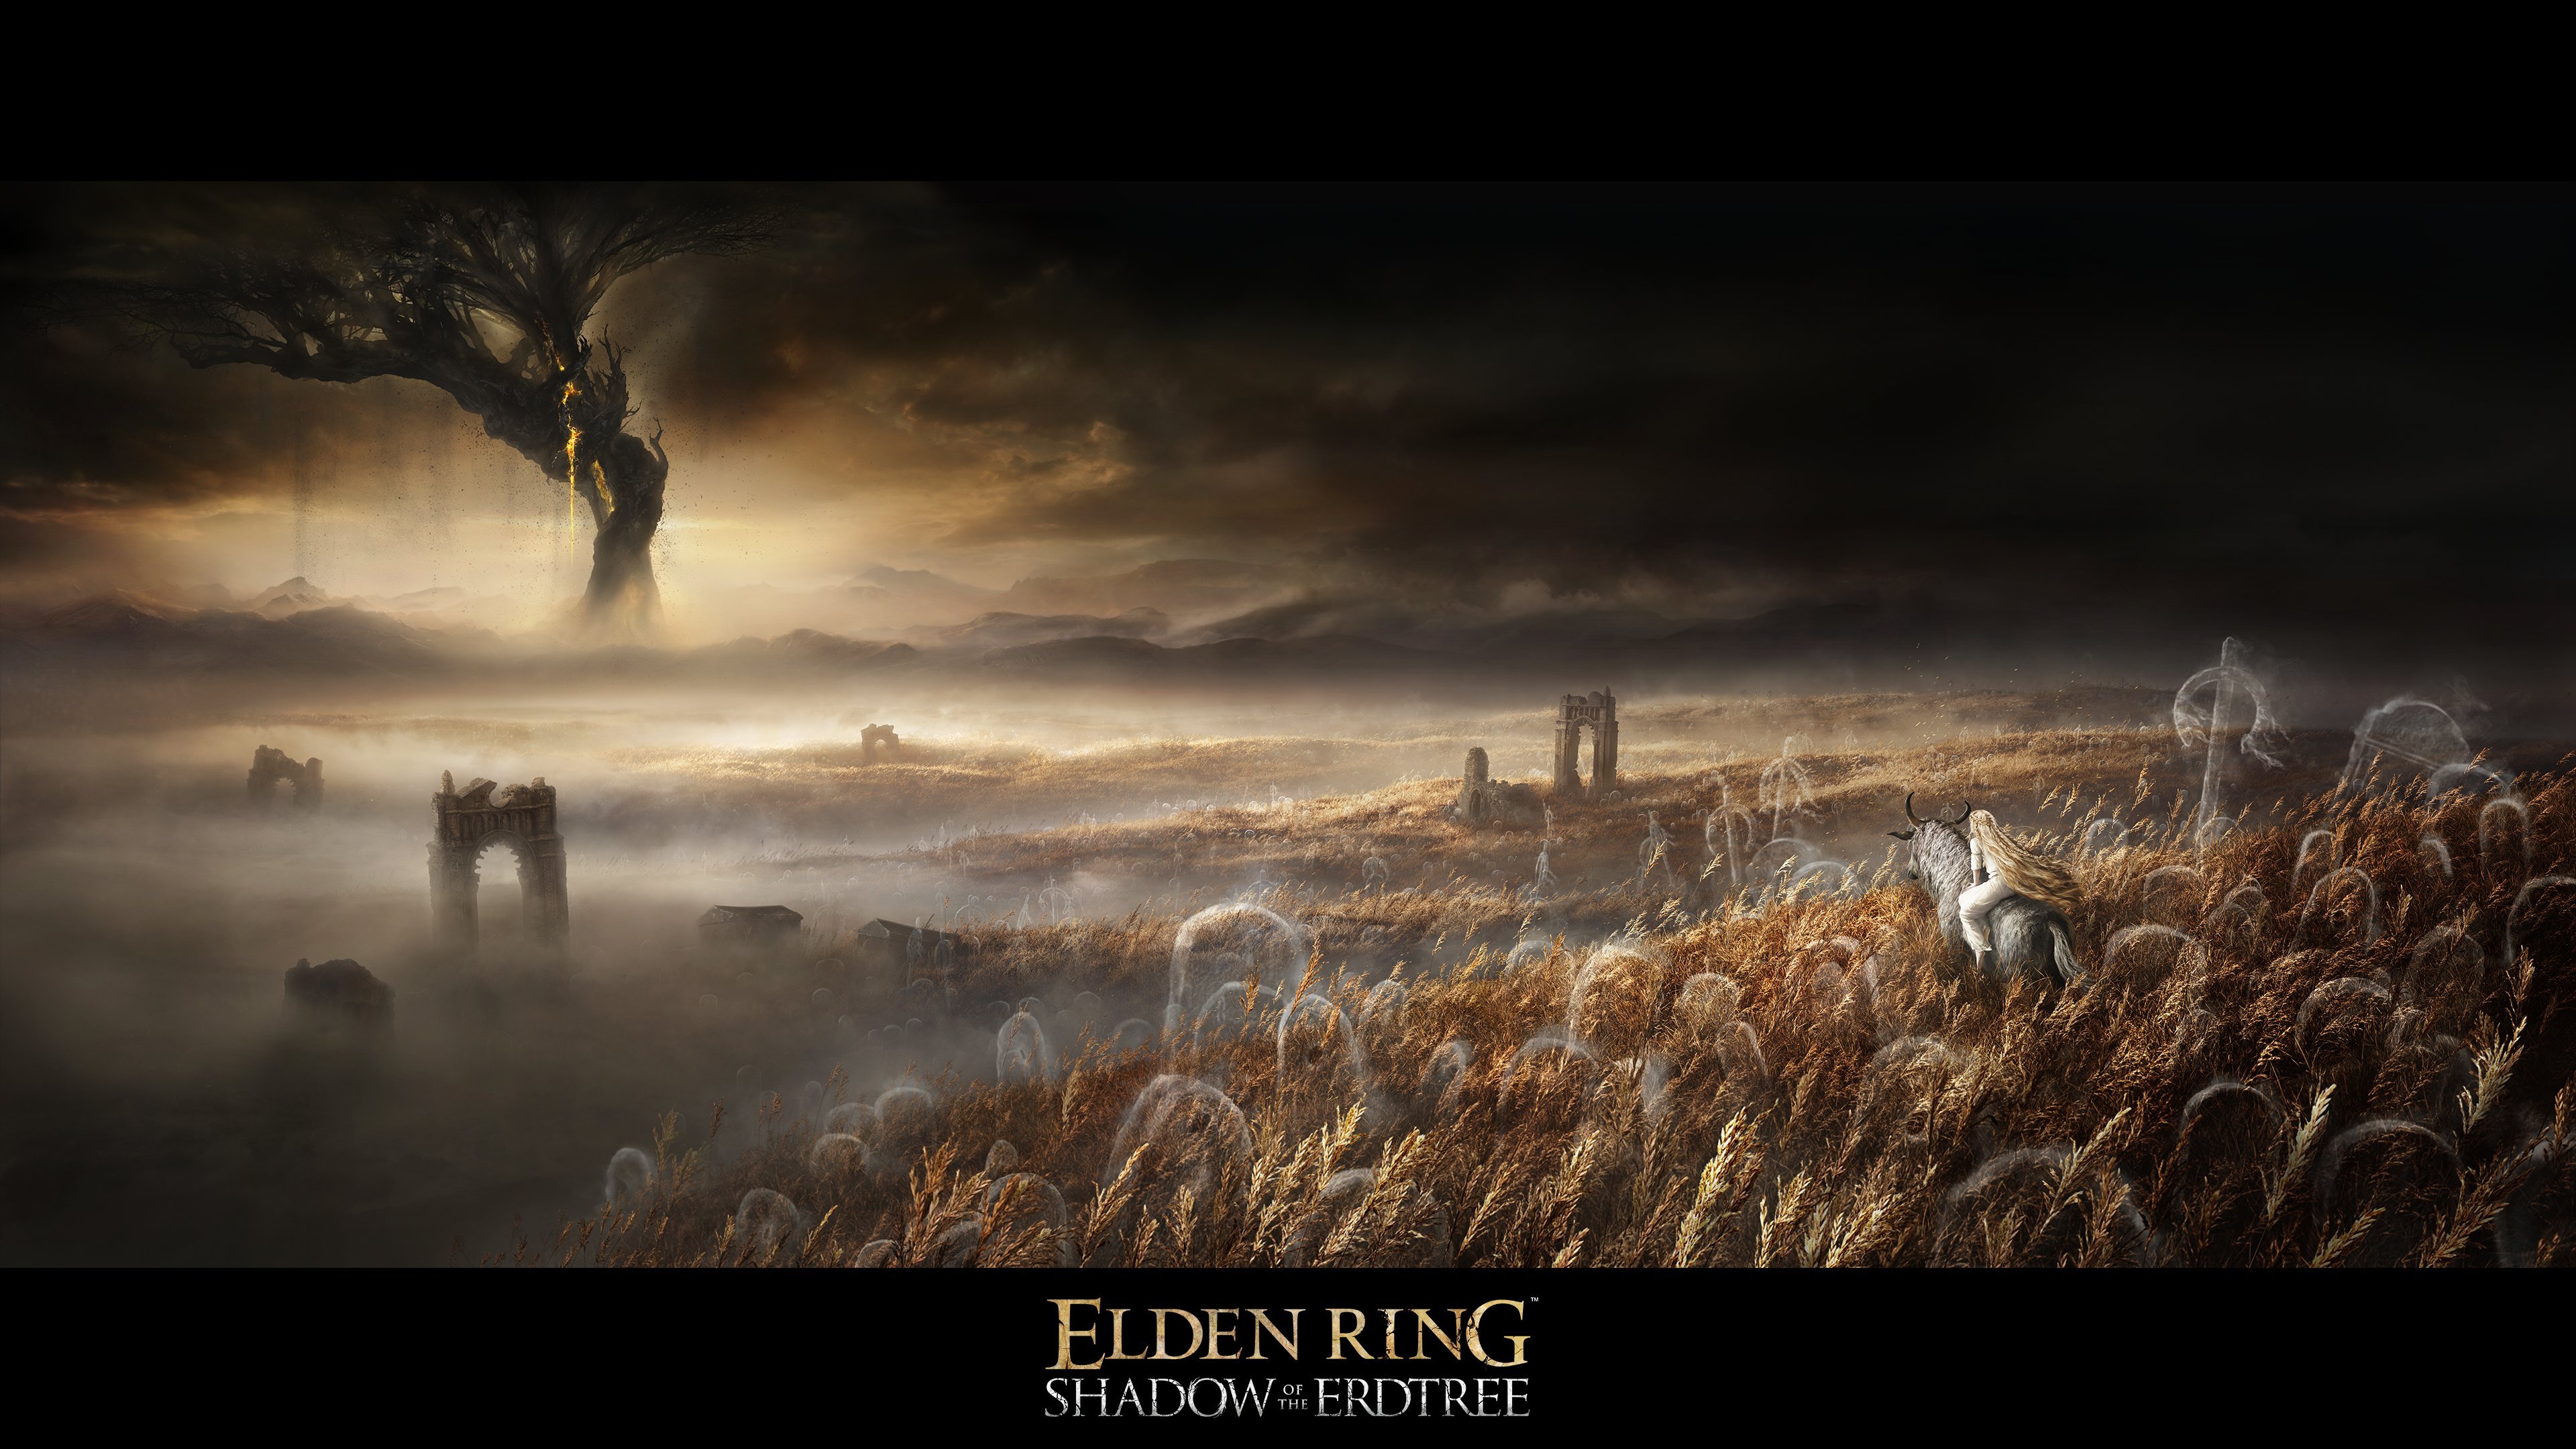 Elden Ring expansion ‘Shadow of the Erdtree’ announced